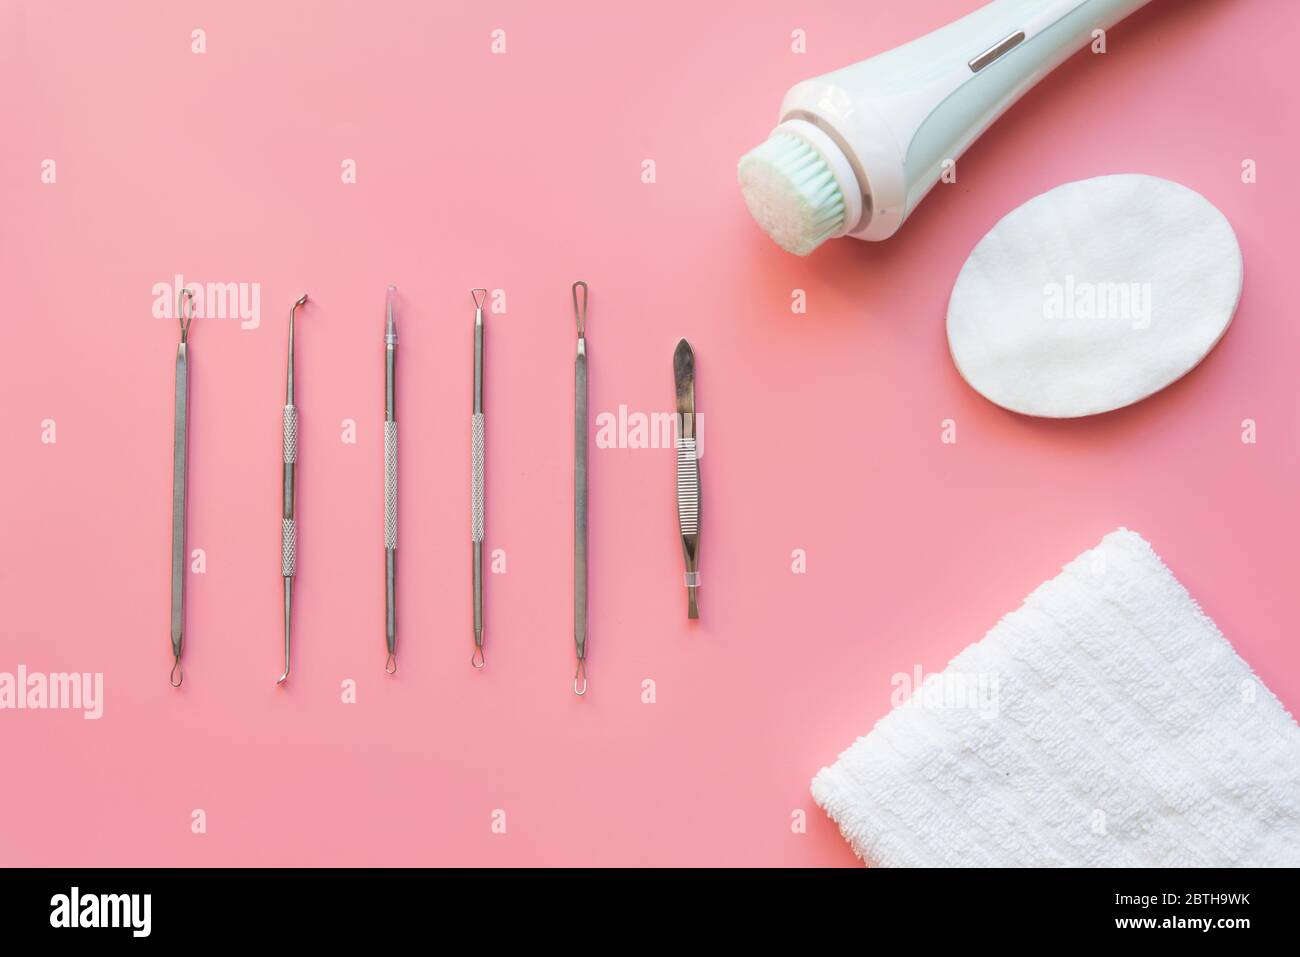 Tools for removing acne Stock Photo